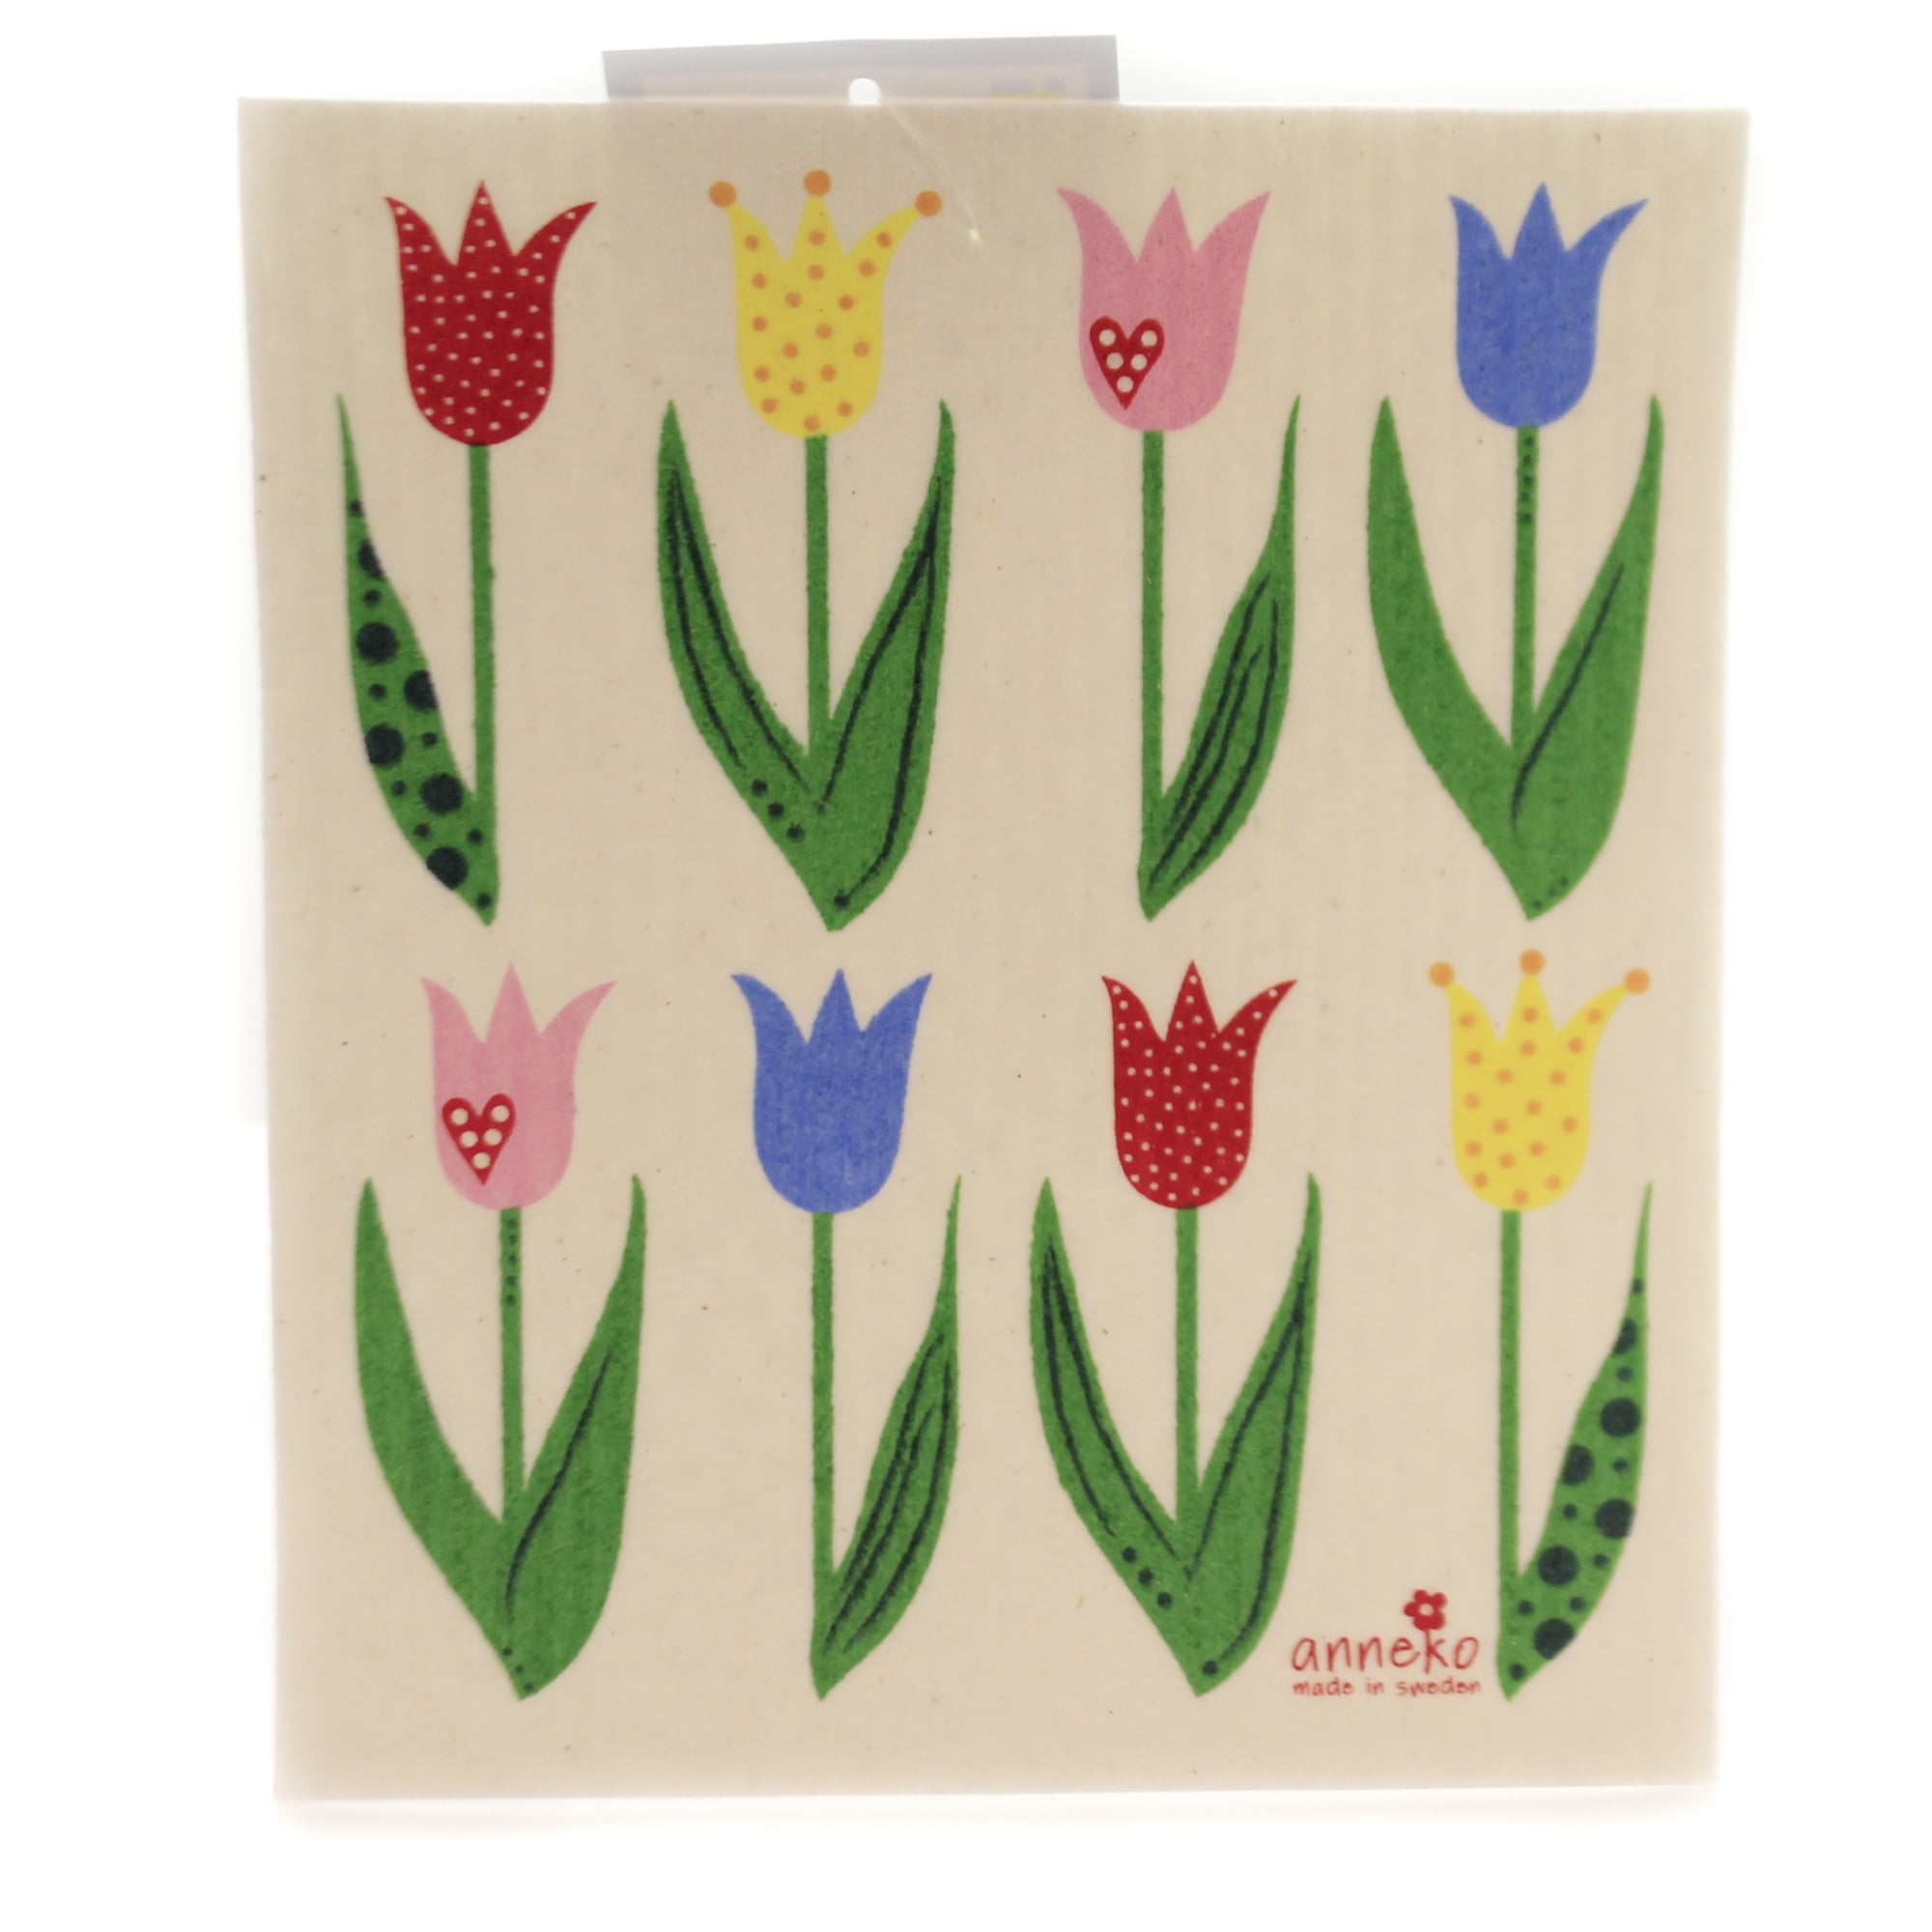 Swedish Hand or Dish Towel "Tulips" by Anneko  12" X 20"  Cotton/Cellulose 